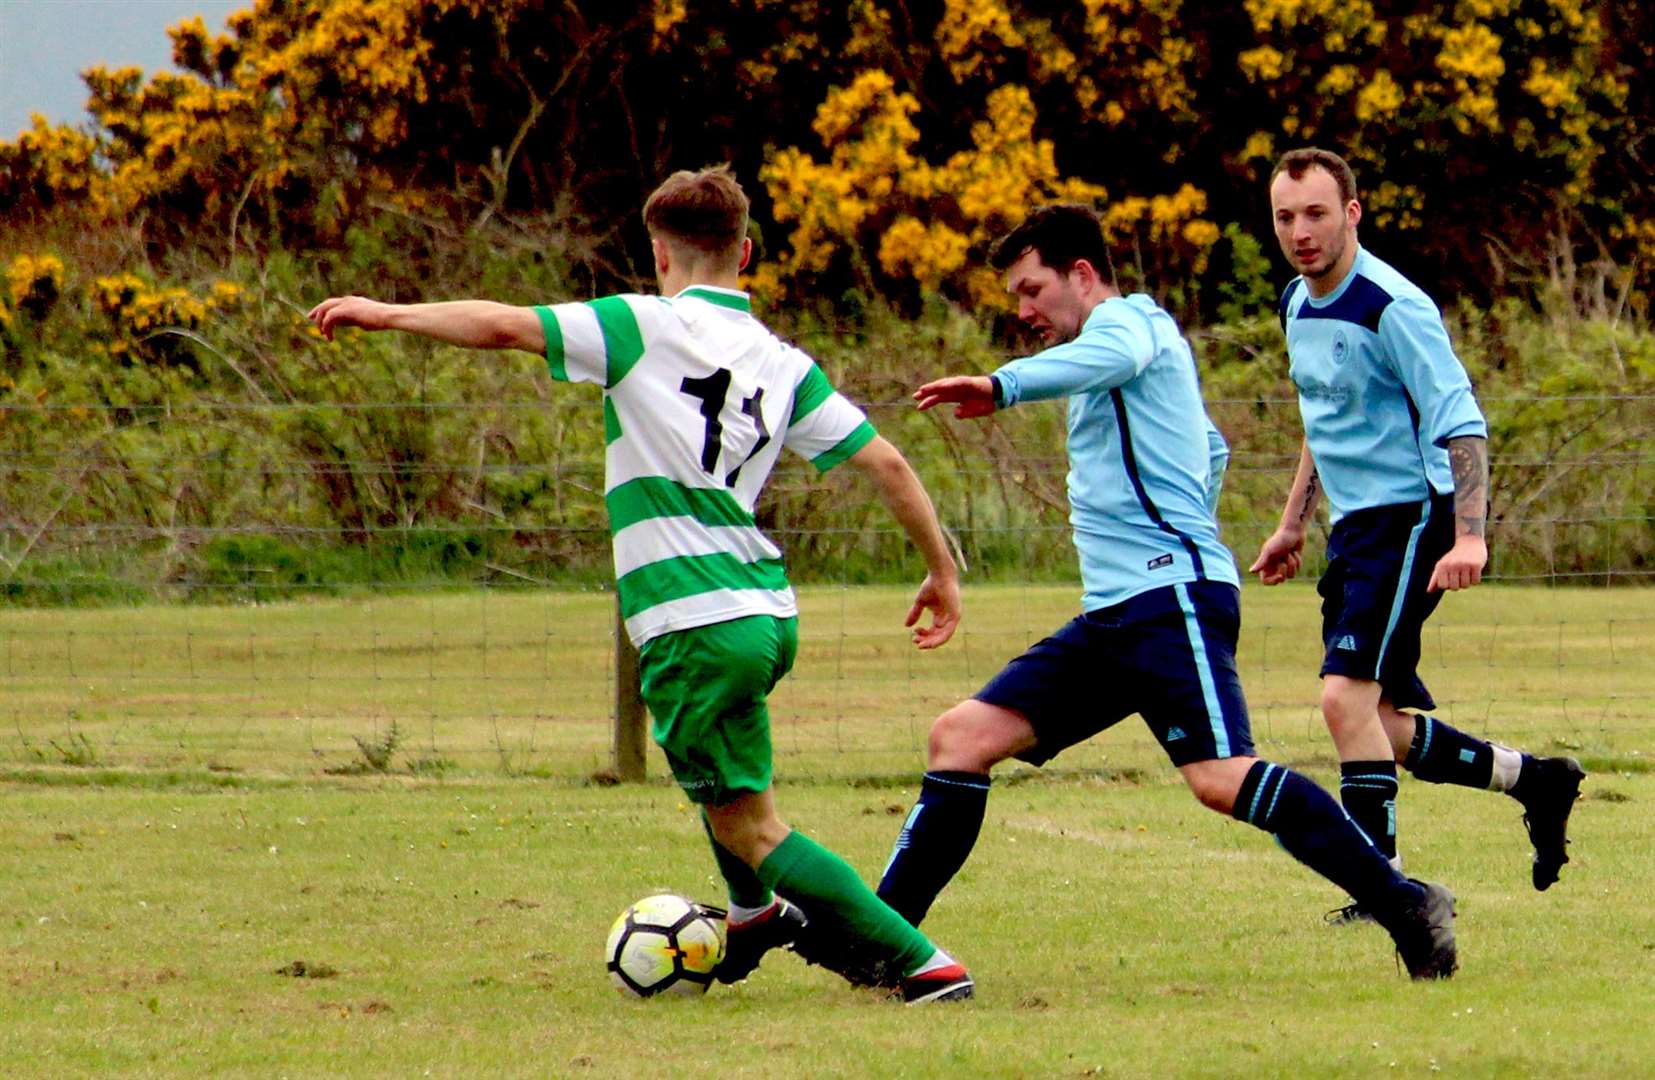 Helmsdale United and Golspie Stafford in action when last the teams met in 2019. Photo: Niall Harkiss